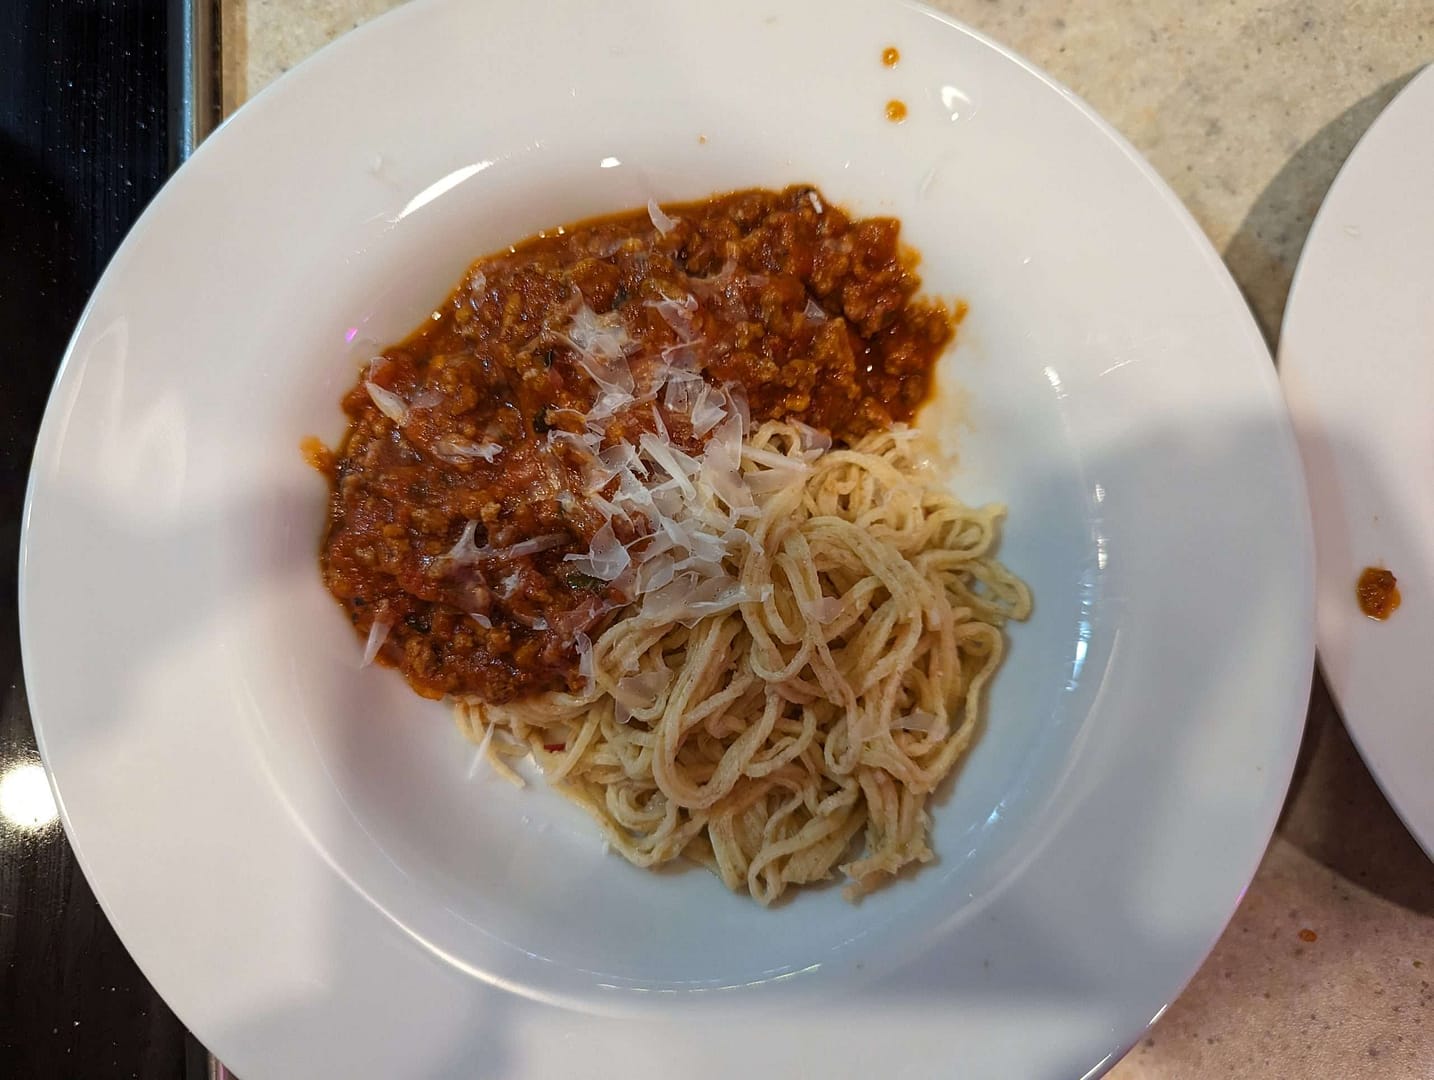 A plate of spaghetti and meat sauce being cooked on a stove.